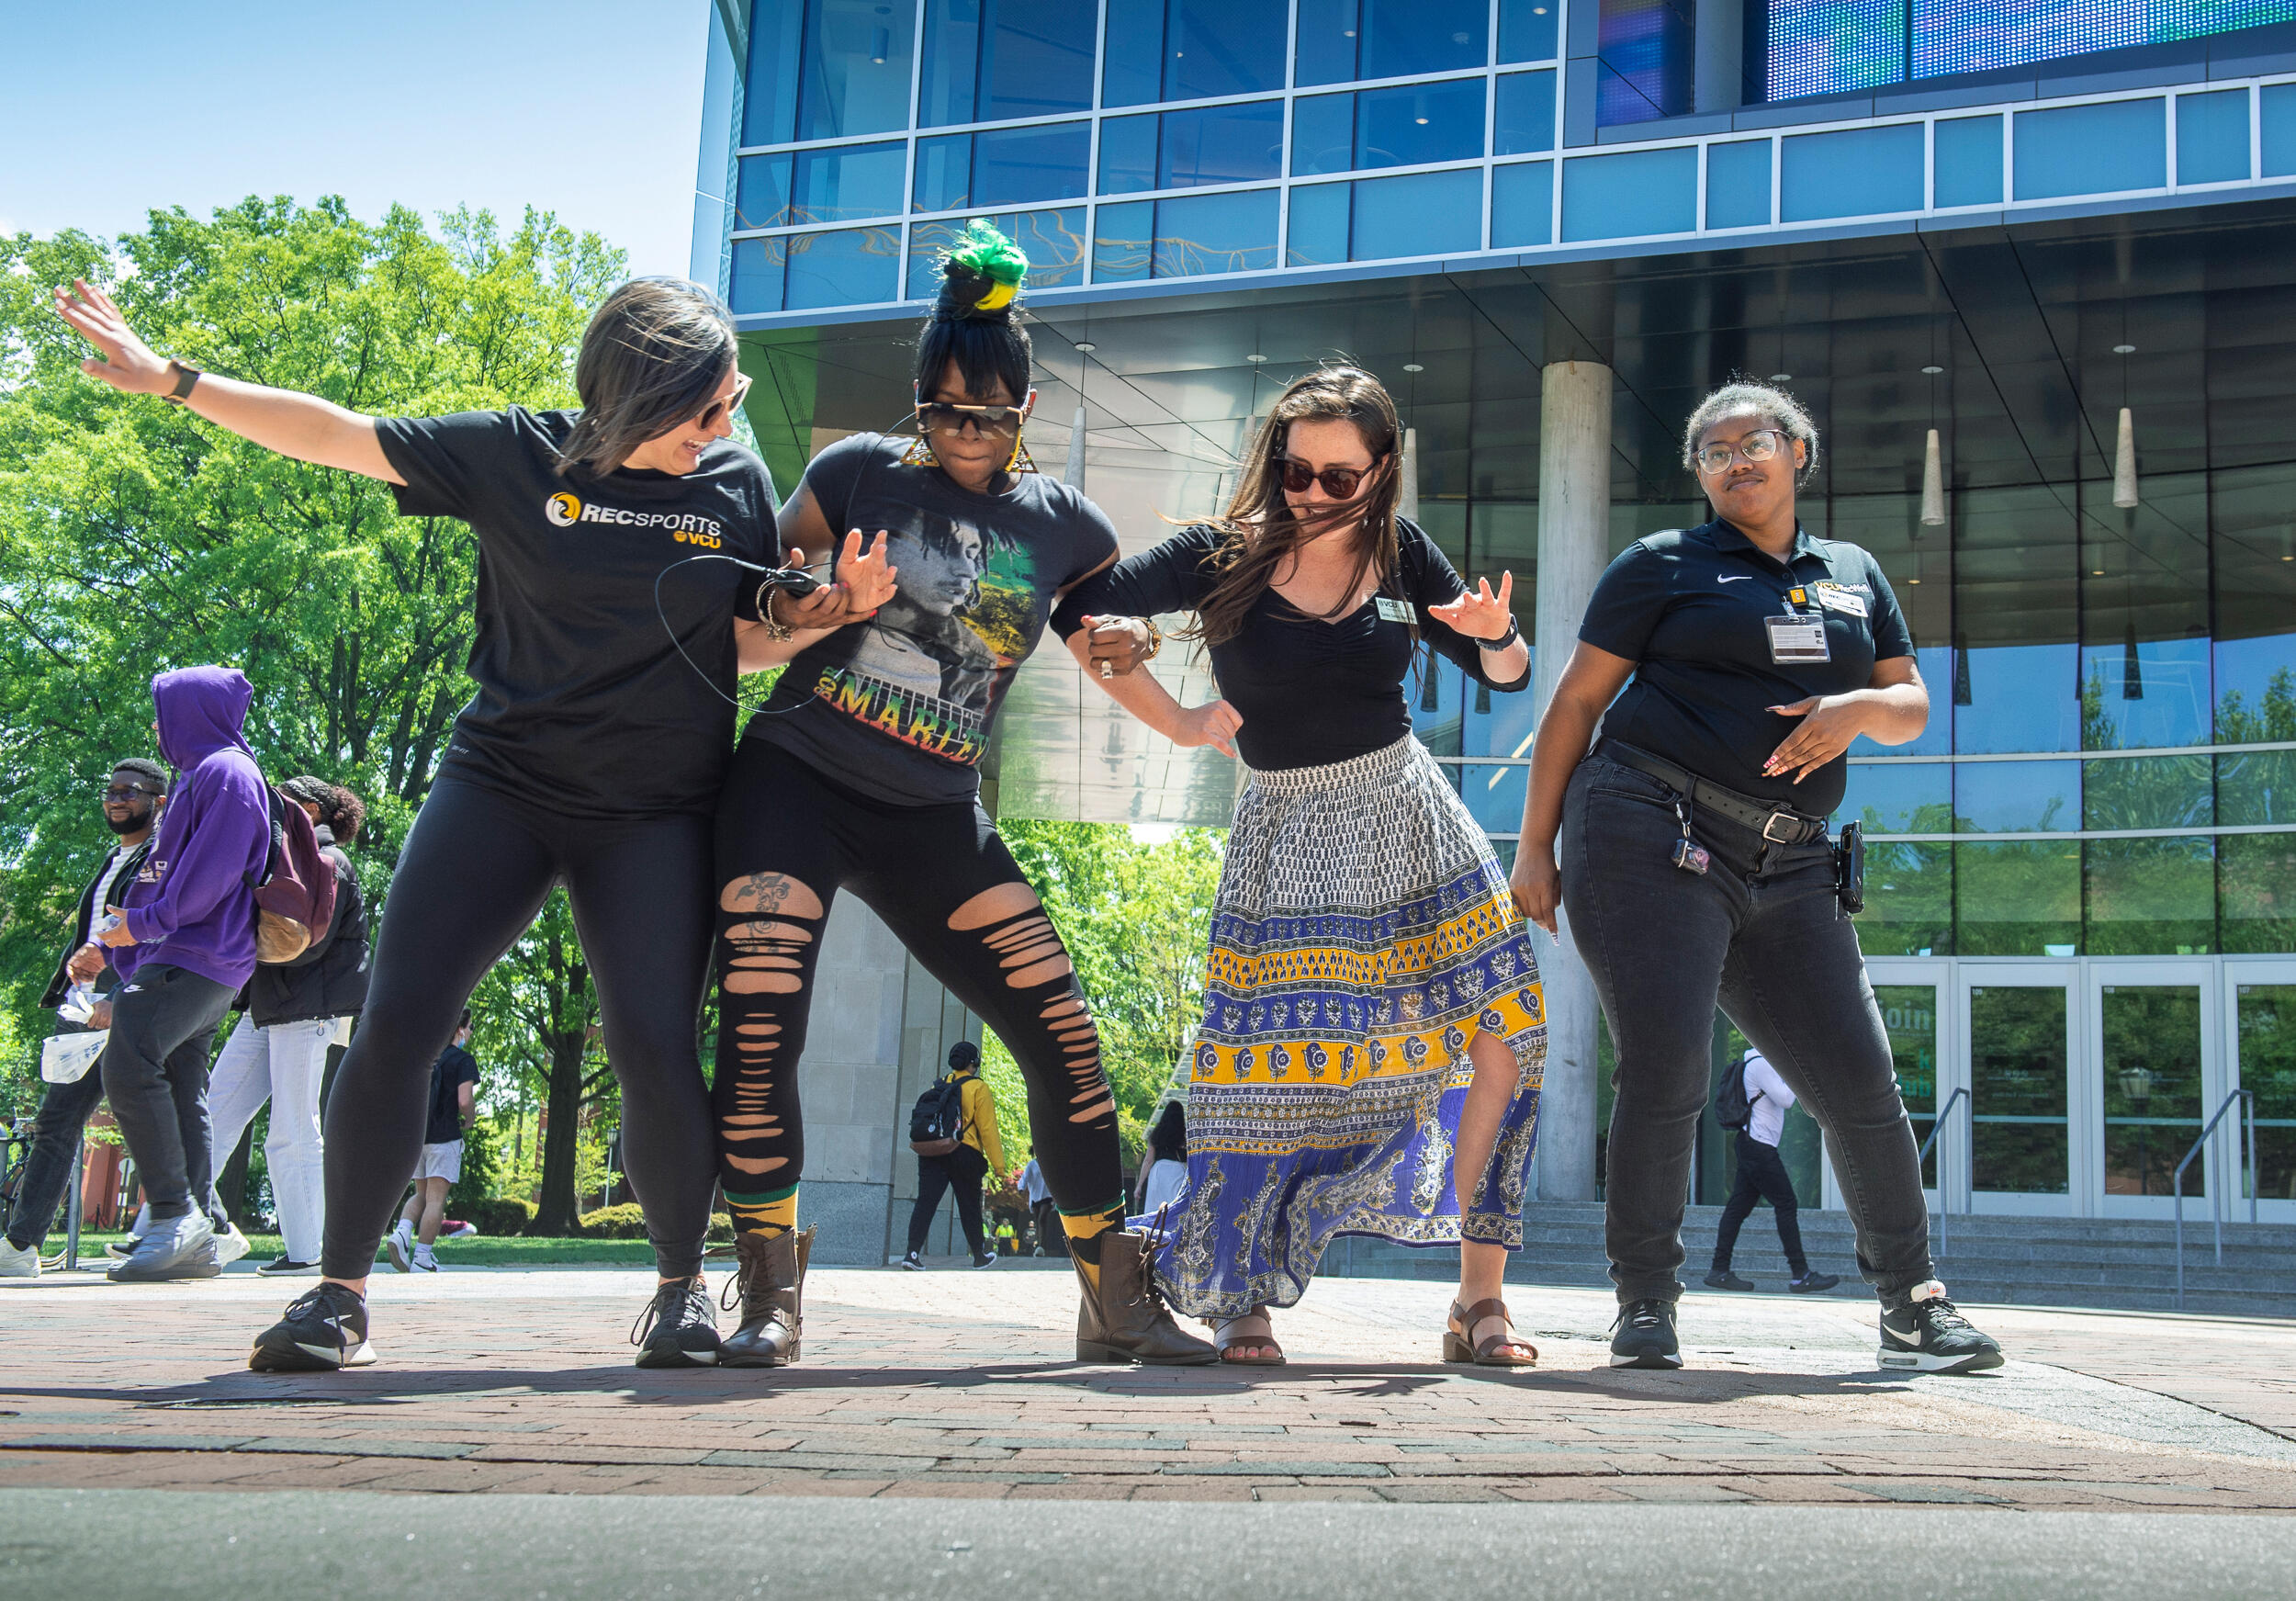 A group of VCU community members dance together in front of the new glass facade of a building on a sunny day on a brick sidewalk.